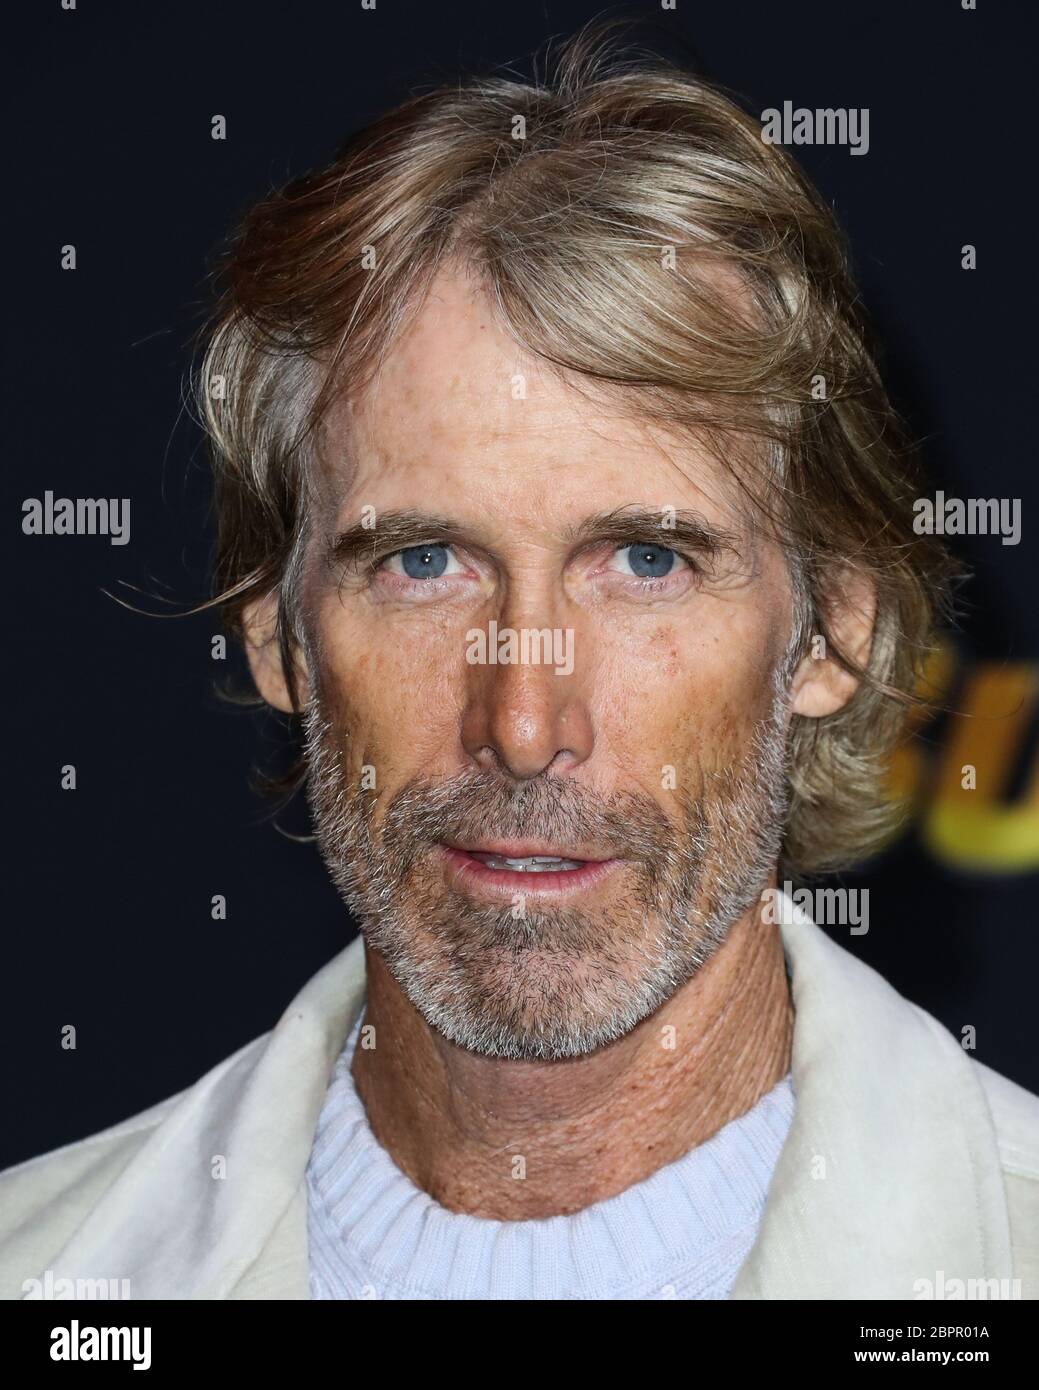 (FILE) Michael Bay To Produce Movie About Coronavirus COVID-19 Pandemic That Will Film During The Pandemic. Michael Bay has added his producing power to a new movie, called Songbird, that will somehow be filmed during the coronavirus pandemic. HOLLYWOOD, LOS ANGELES, CALIFORNIA, USA - DECEMBER 09: Director Michael Bay arrives at the Los Angeles Premiere Of Paramount Pictures' 'Bumblebee' held at the TCL Chinese Theatre IMAX on December 9, 2018 in Hollywood, Los Angeles, California, United States. (Photo by Xavier Collin/Image Press Agency) Stock Photo